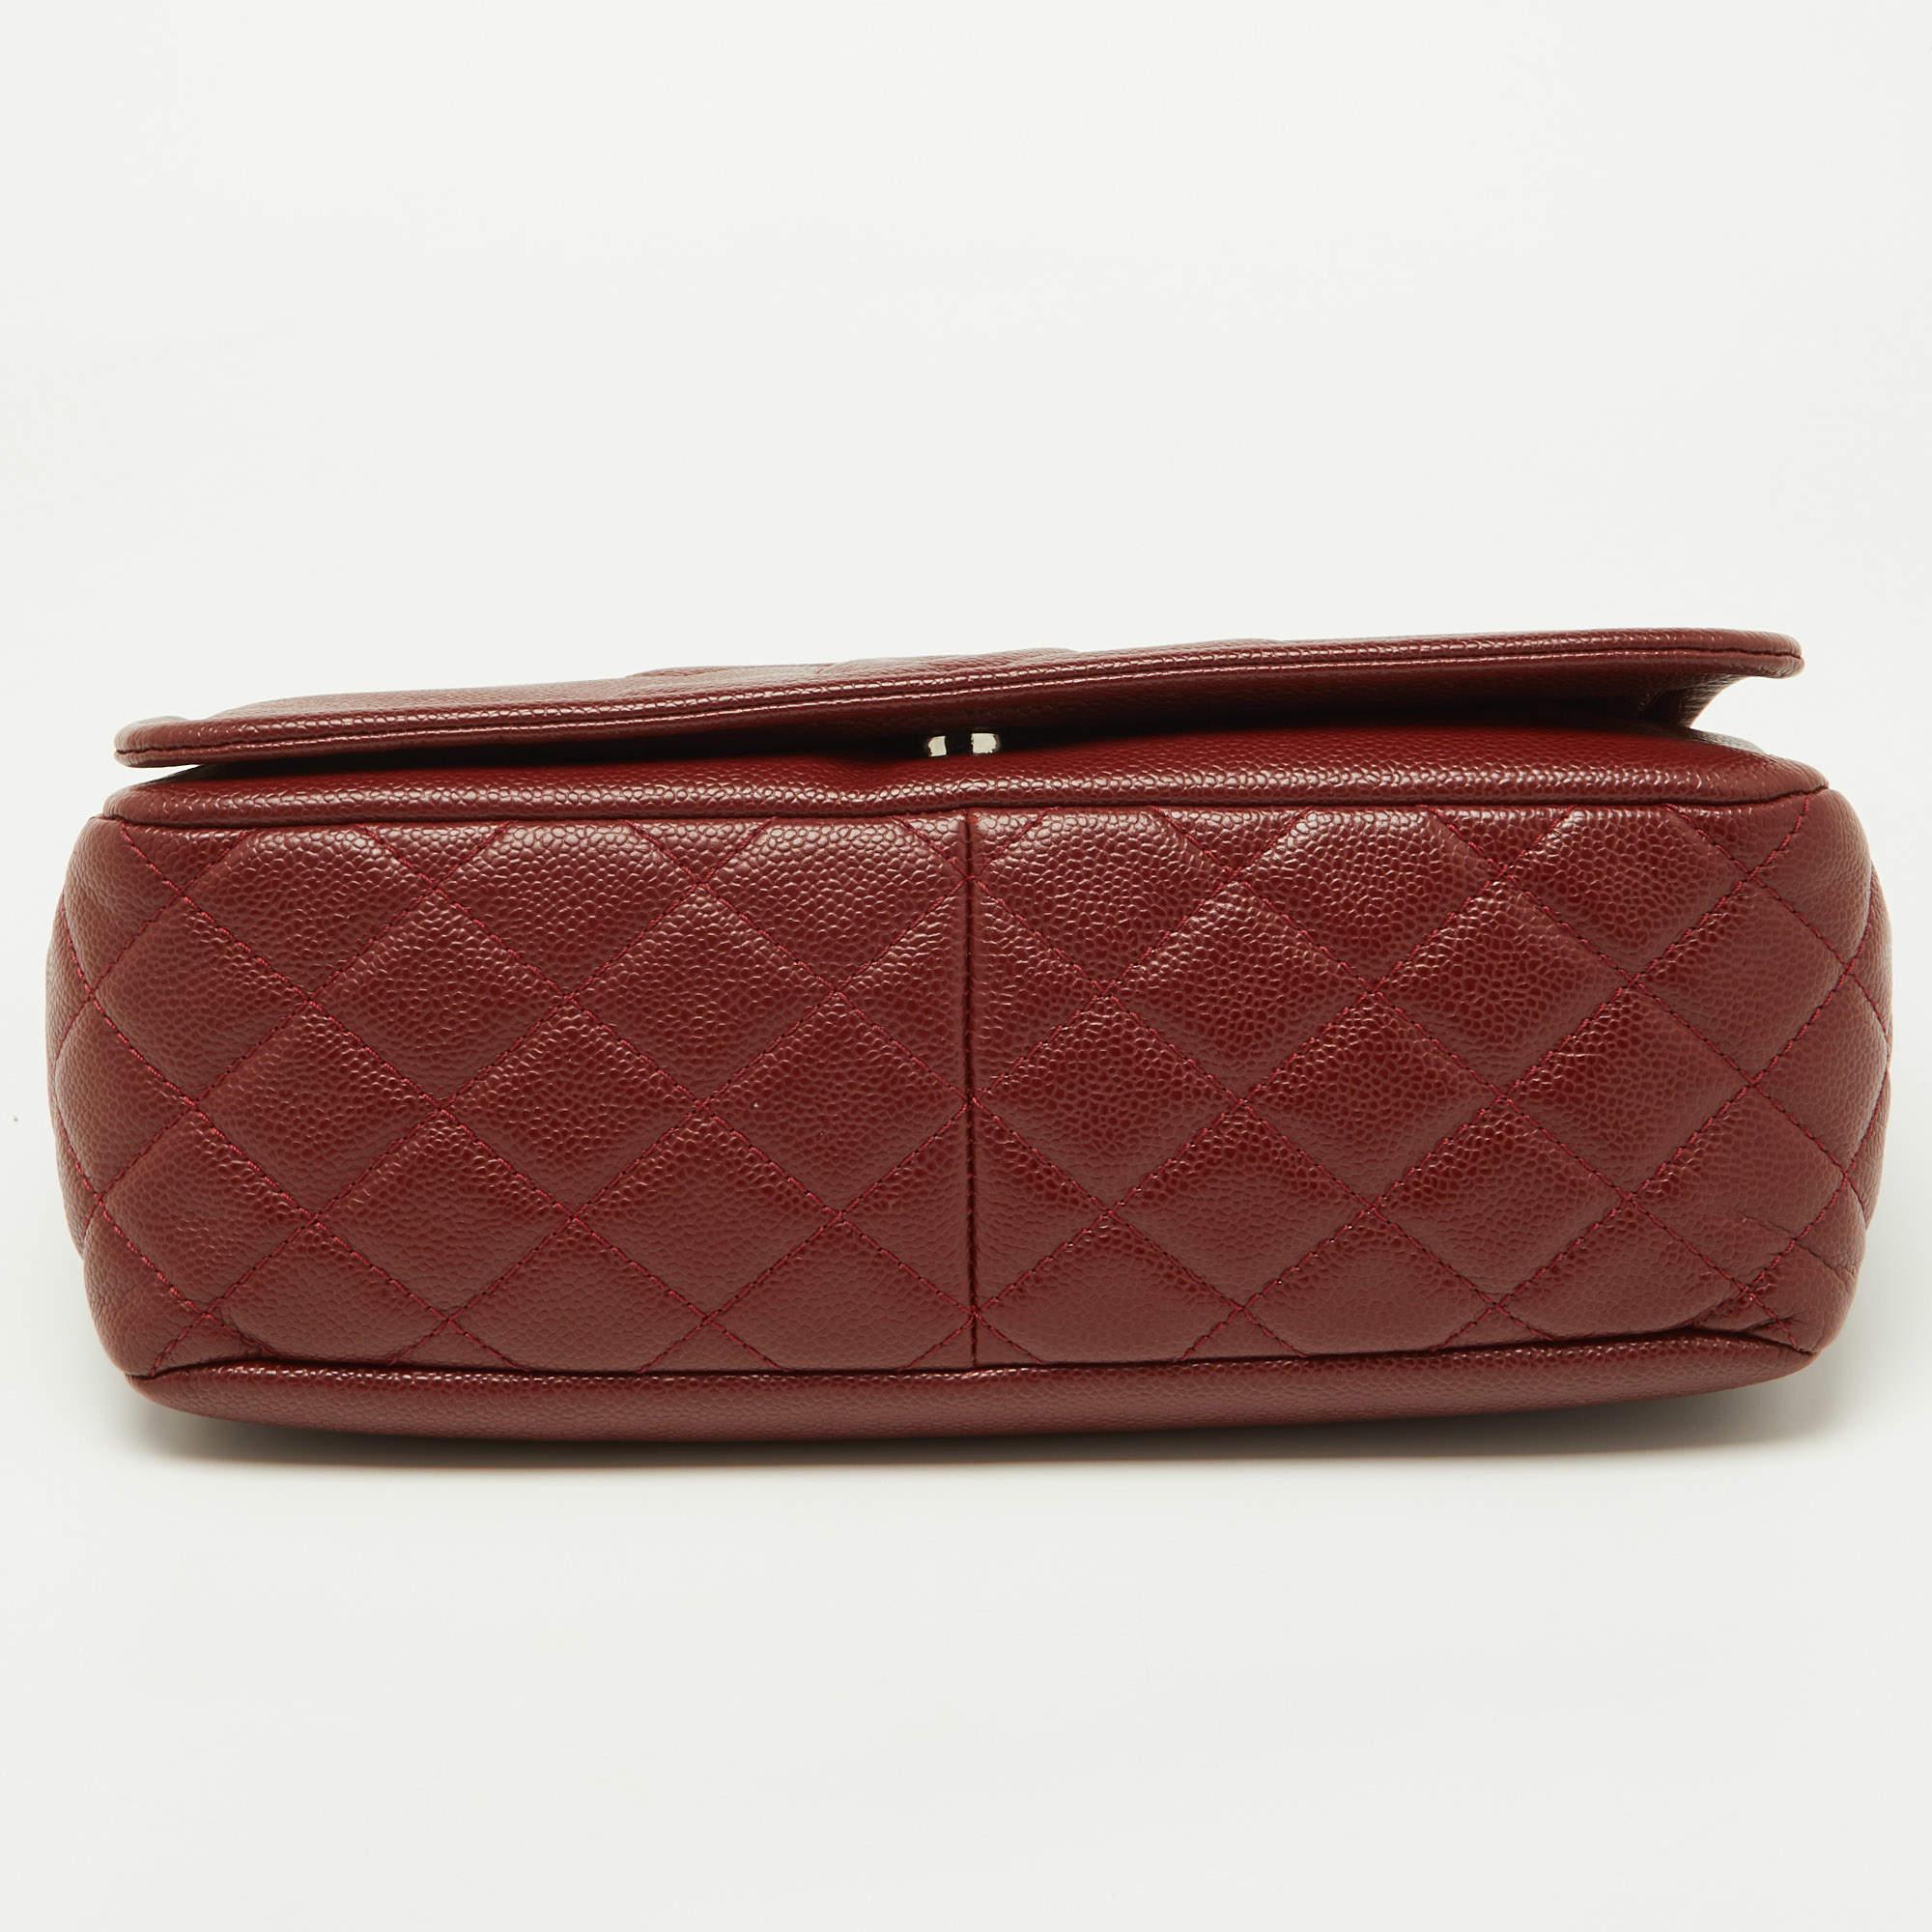 Chanel Dark Red Caviar Leather Large CC Timeless Flap Bag For Sale 6